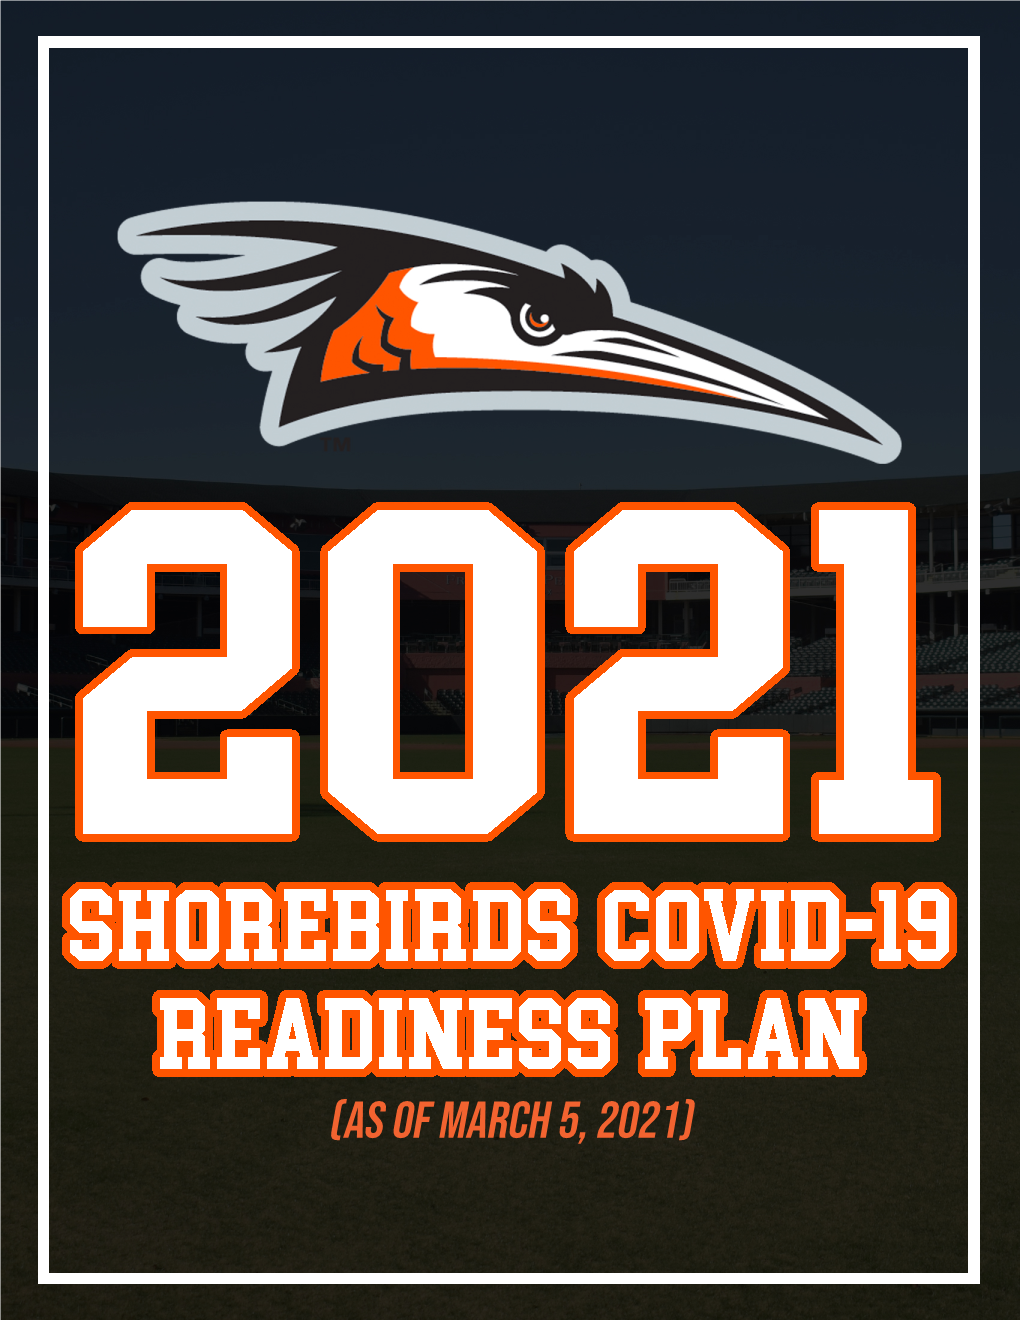 (As of March 5, 2021) 2021 Shorebirds COVID-19 READINESS PLAN (As of March 5, 2021) 2